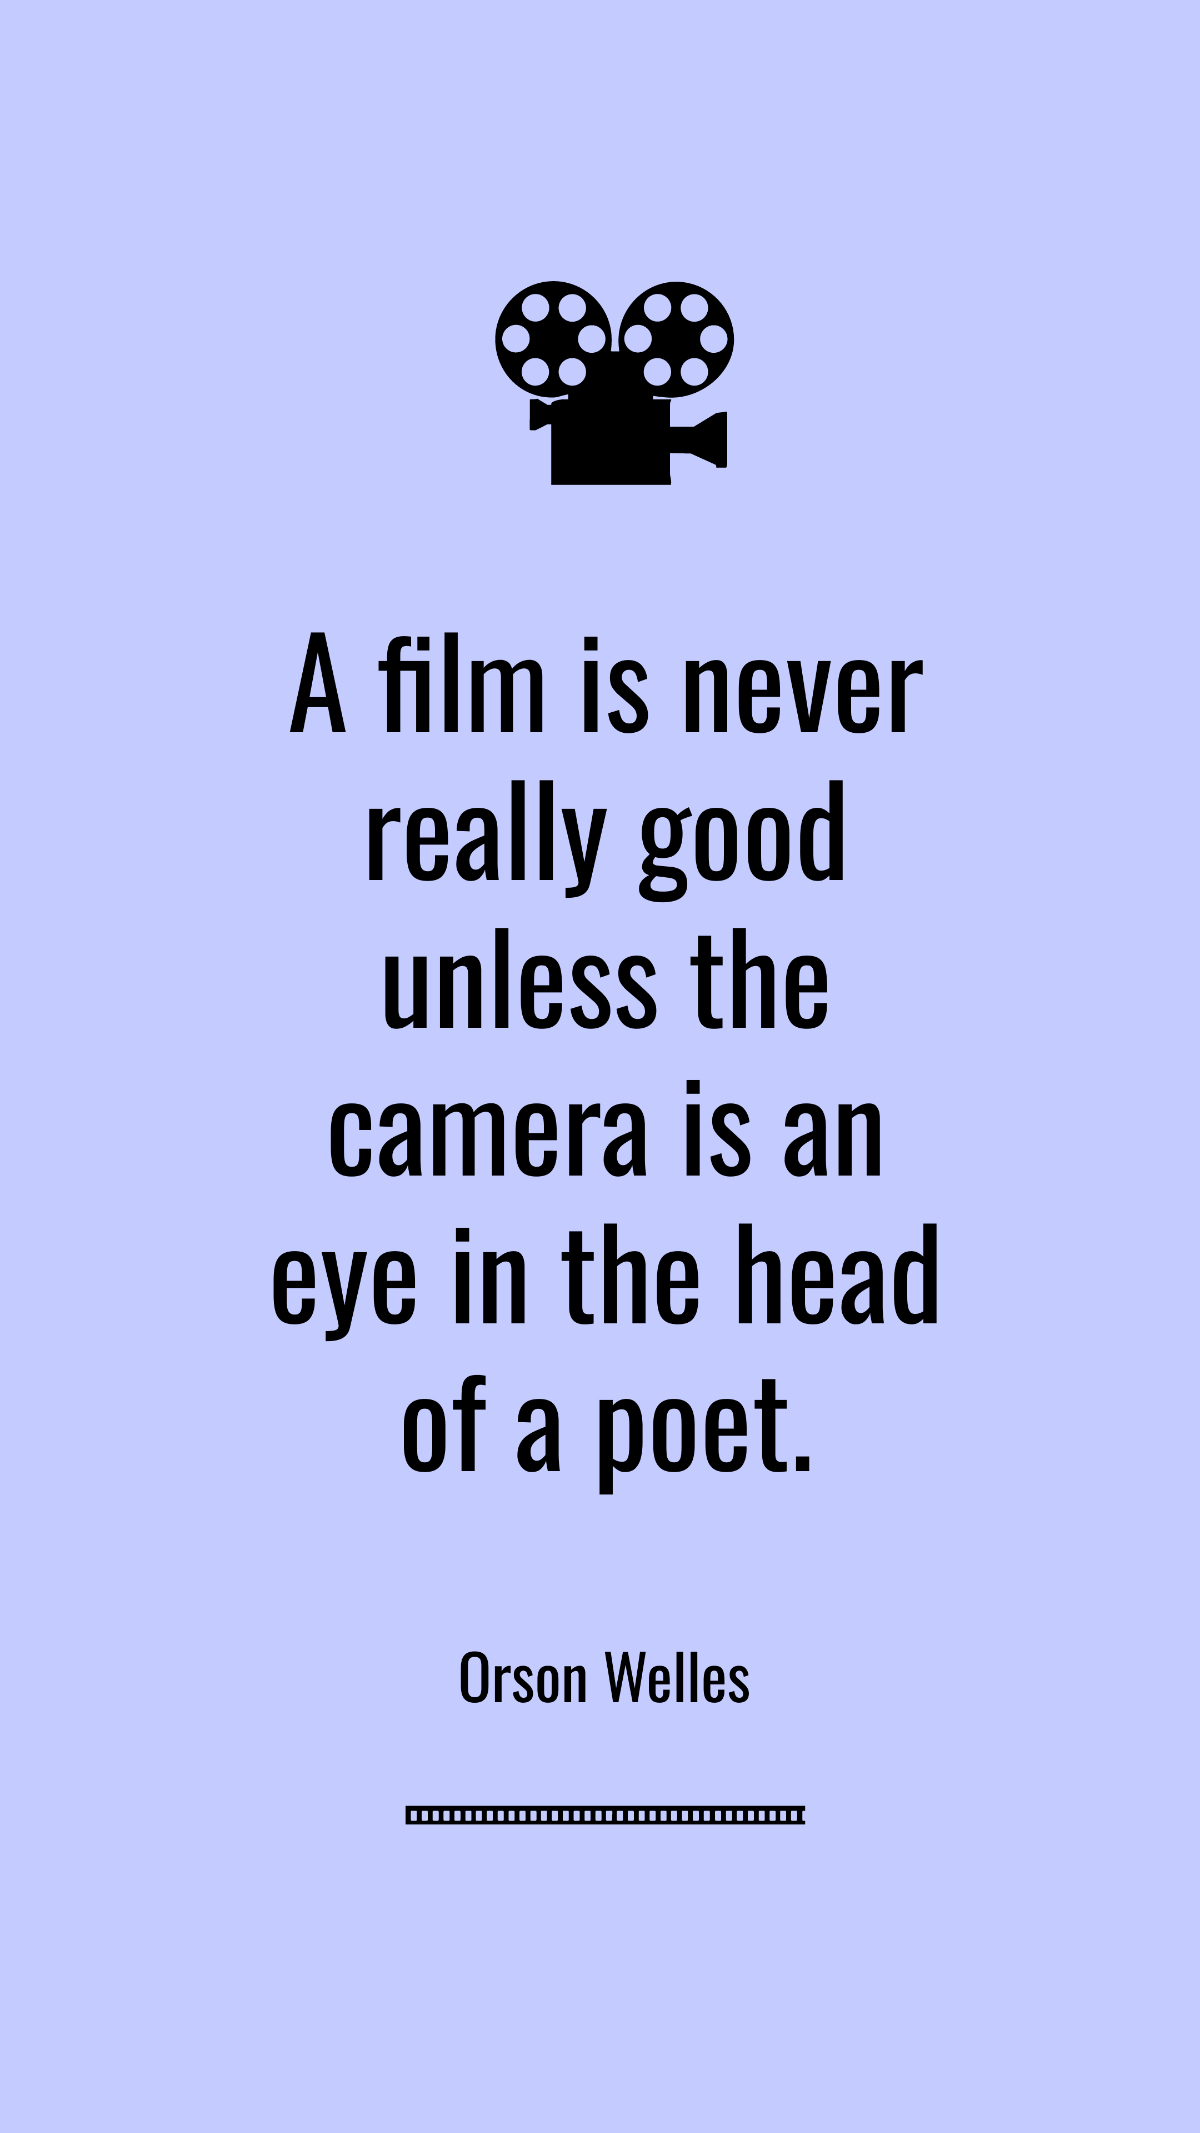 Free Orson Welles - A film is never really good unless the camera is an eye in the head of a poet. Template